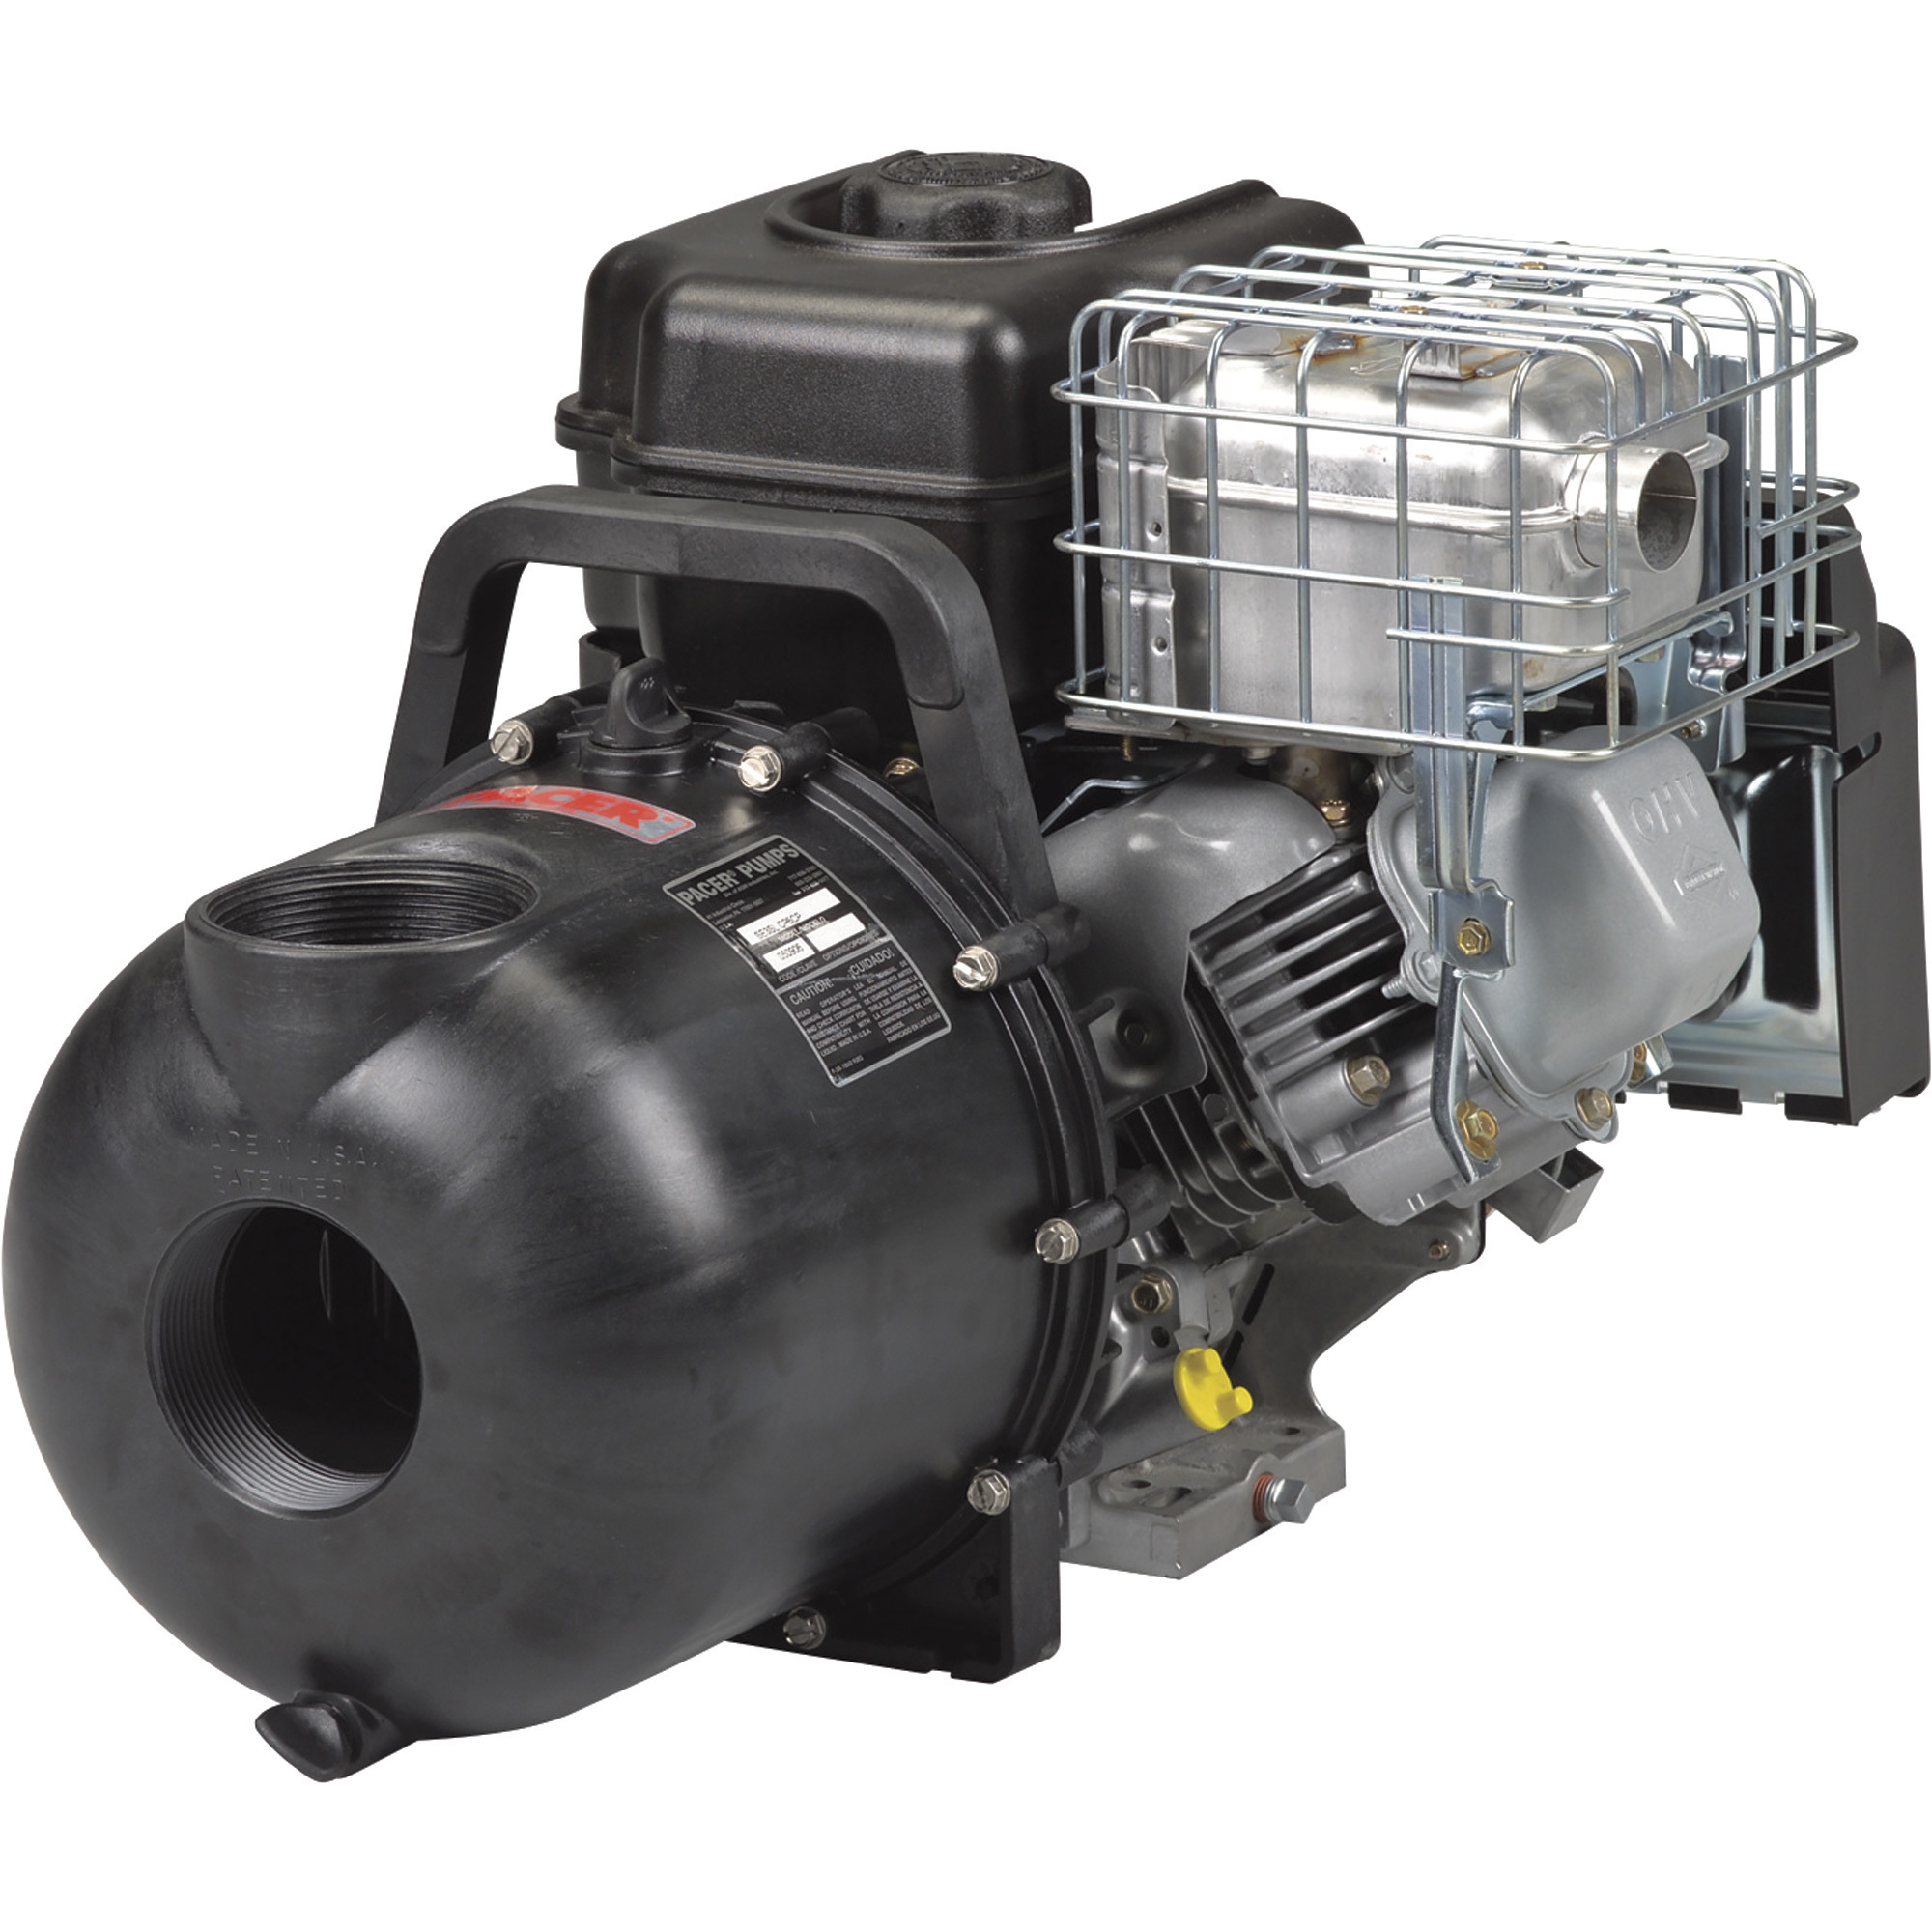 Pacer Self-Priming Chemical Water Pump, 16,500 GPH, 3Inch Ports, 205cc Briggs & Stratton Engine, Model SE3SL E6VCP